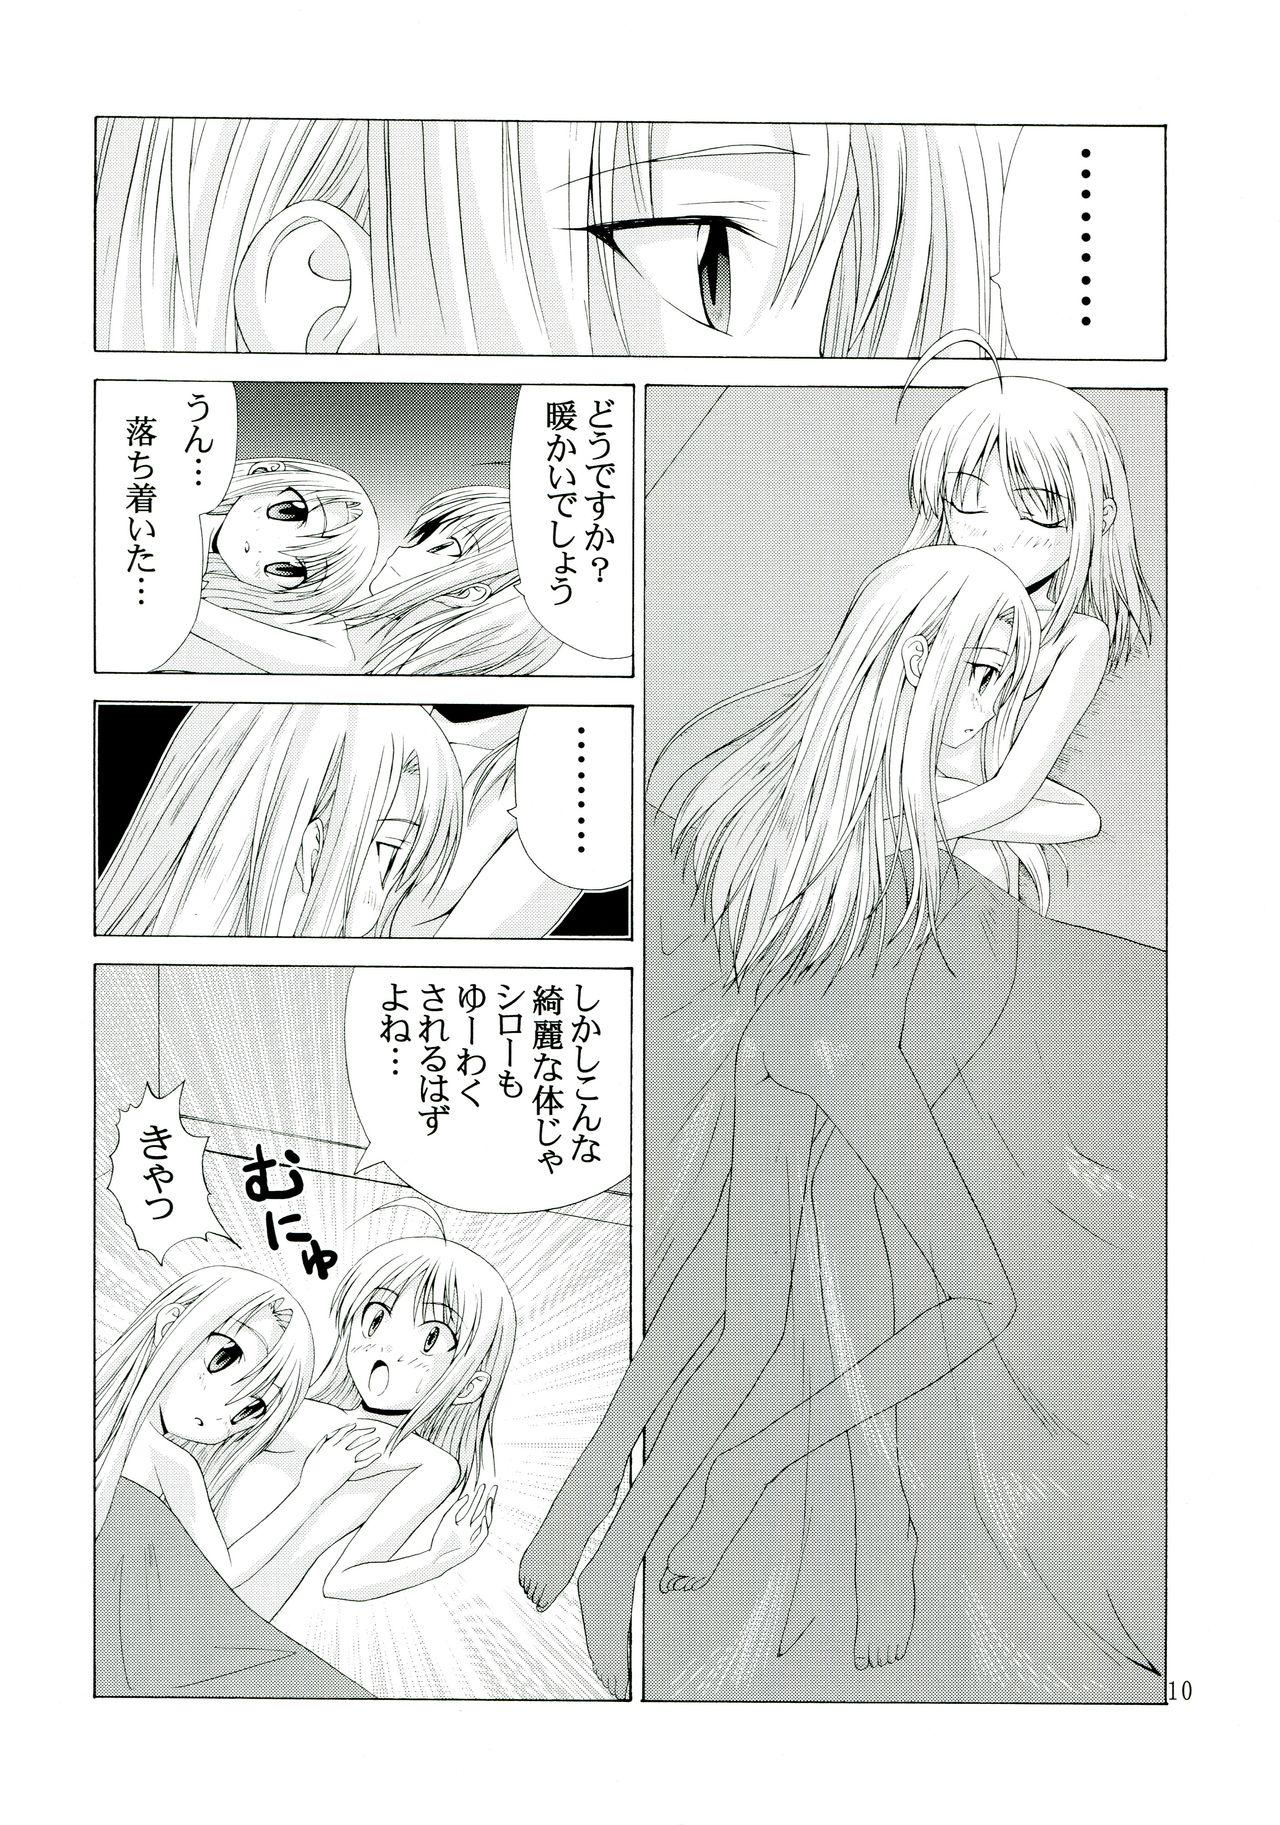 Underwear PLATONIC MAGICIAN H - Fate stay night Top - Page 10